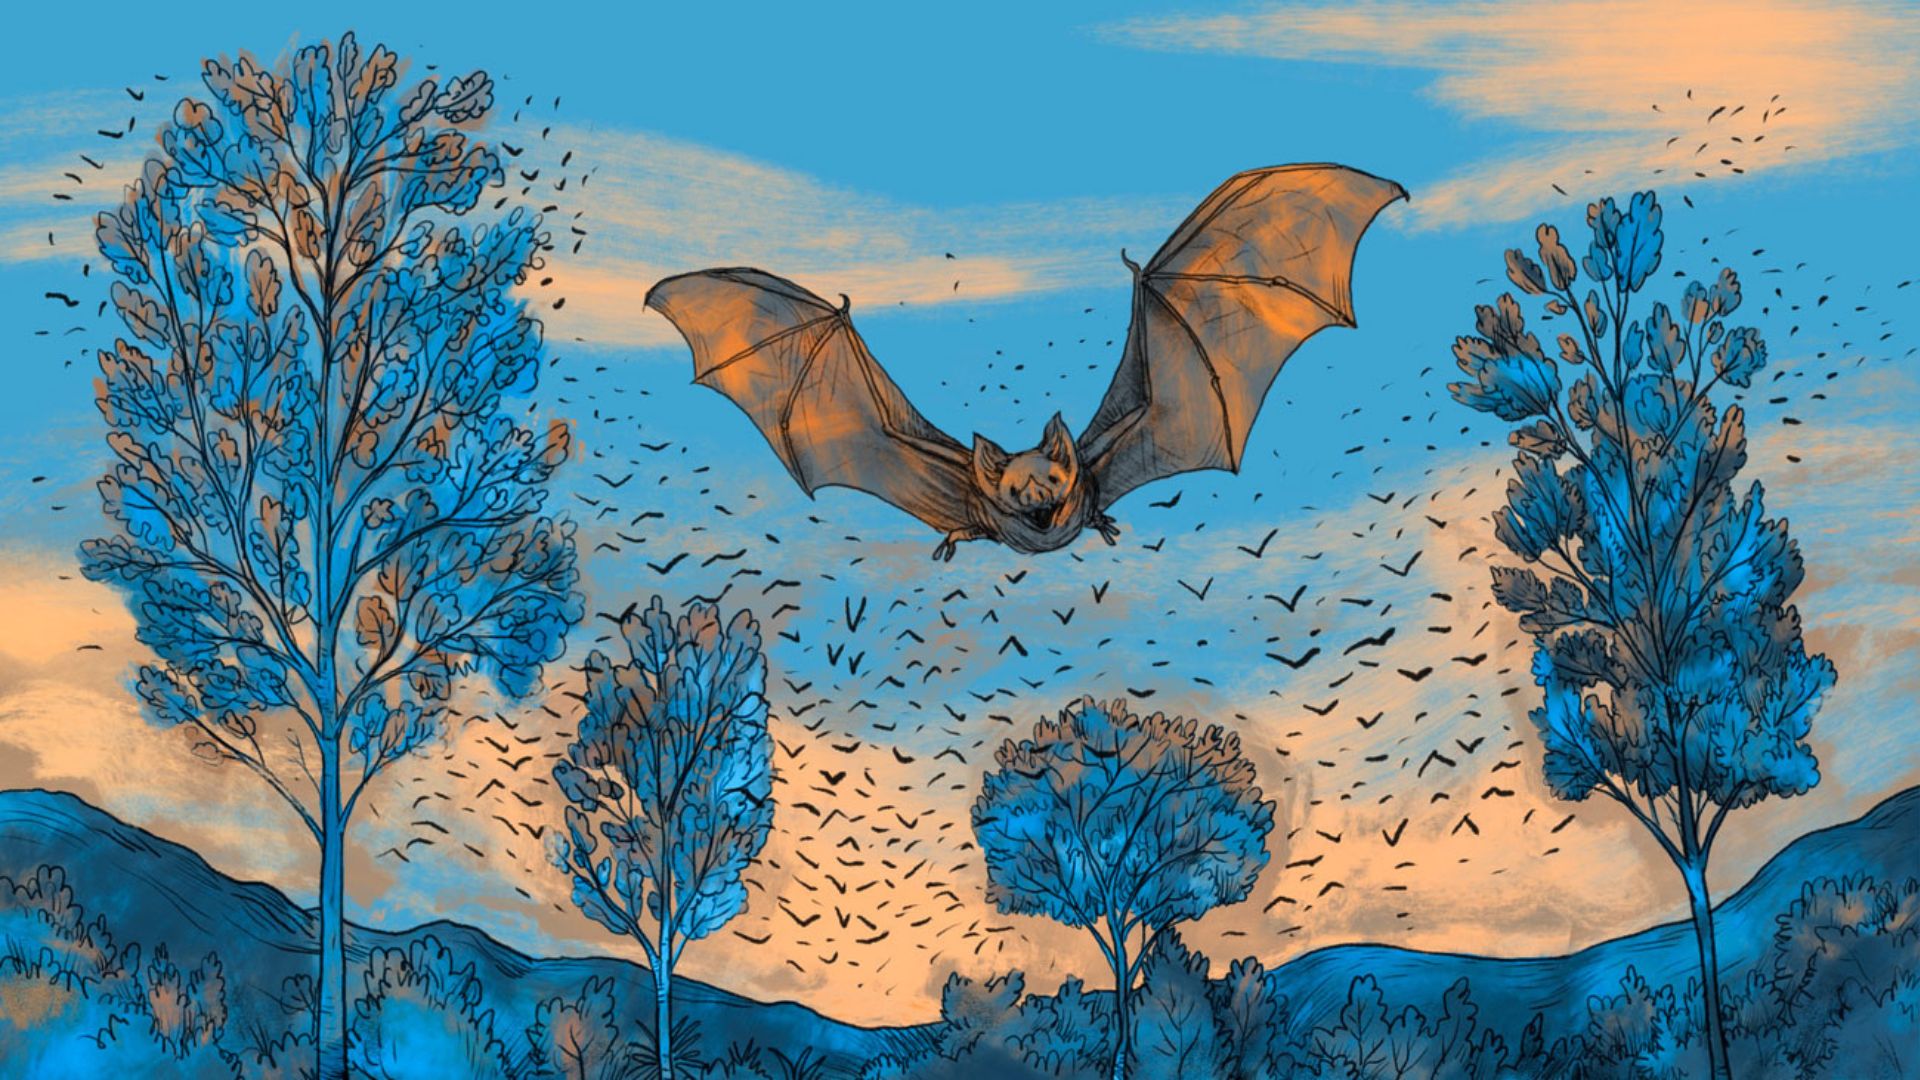 THE BAT LANDS THE NEXT PANDEMIC MAY COME FROM BATS. REUTERS INVESTIGATES WHERE.